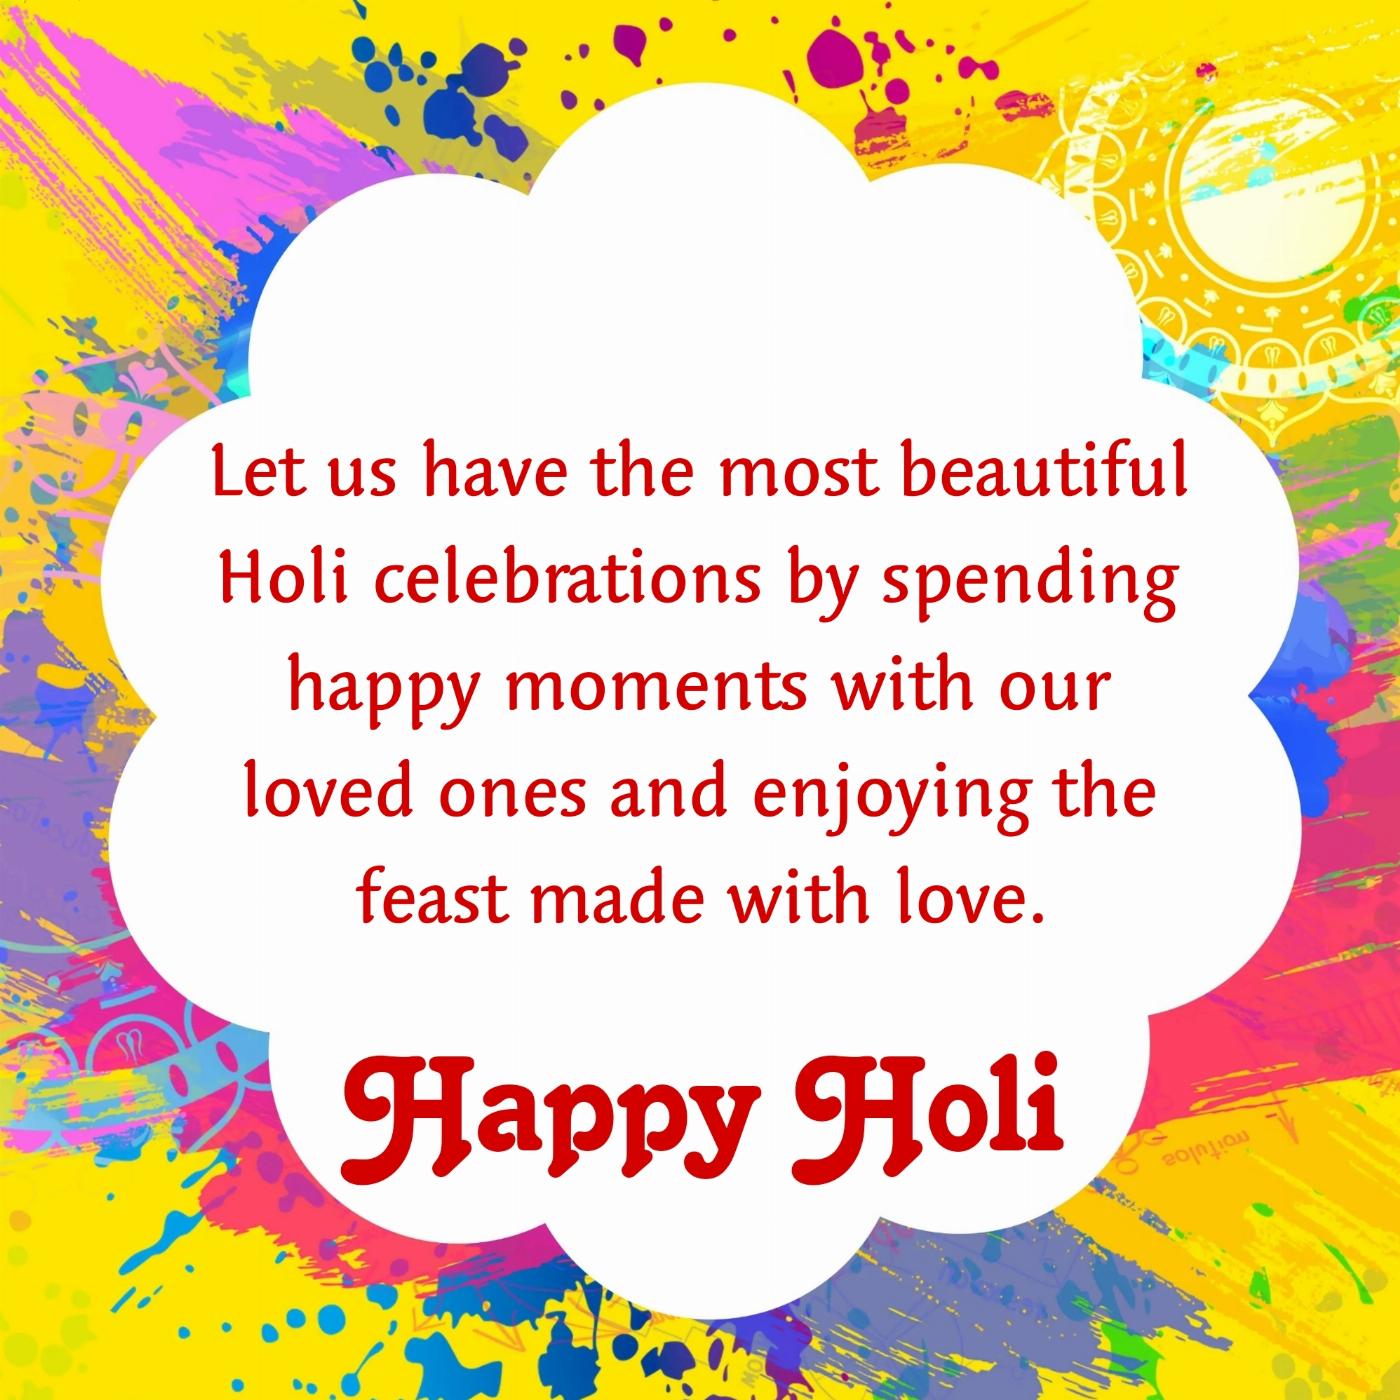 Let us have the most beautiful Holi celebrations